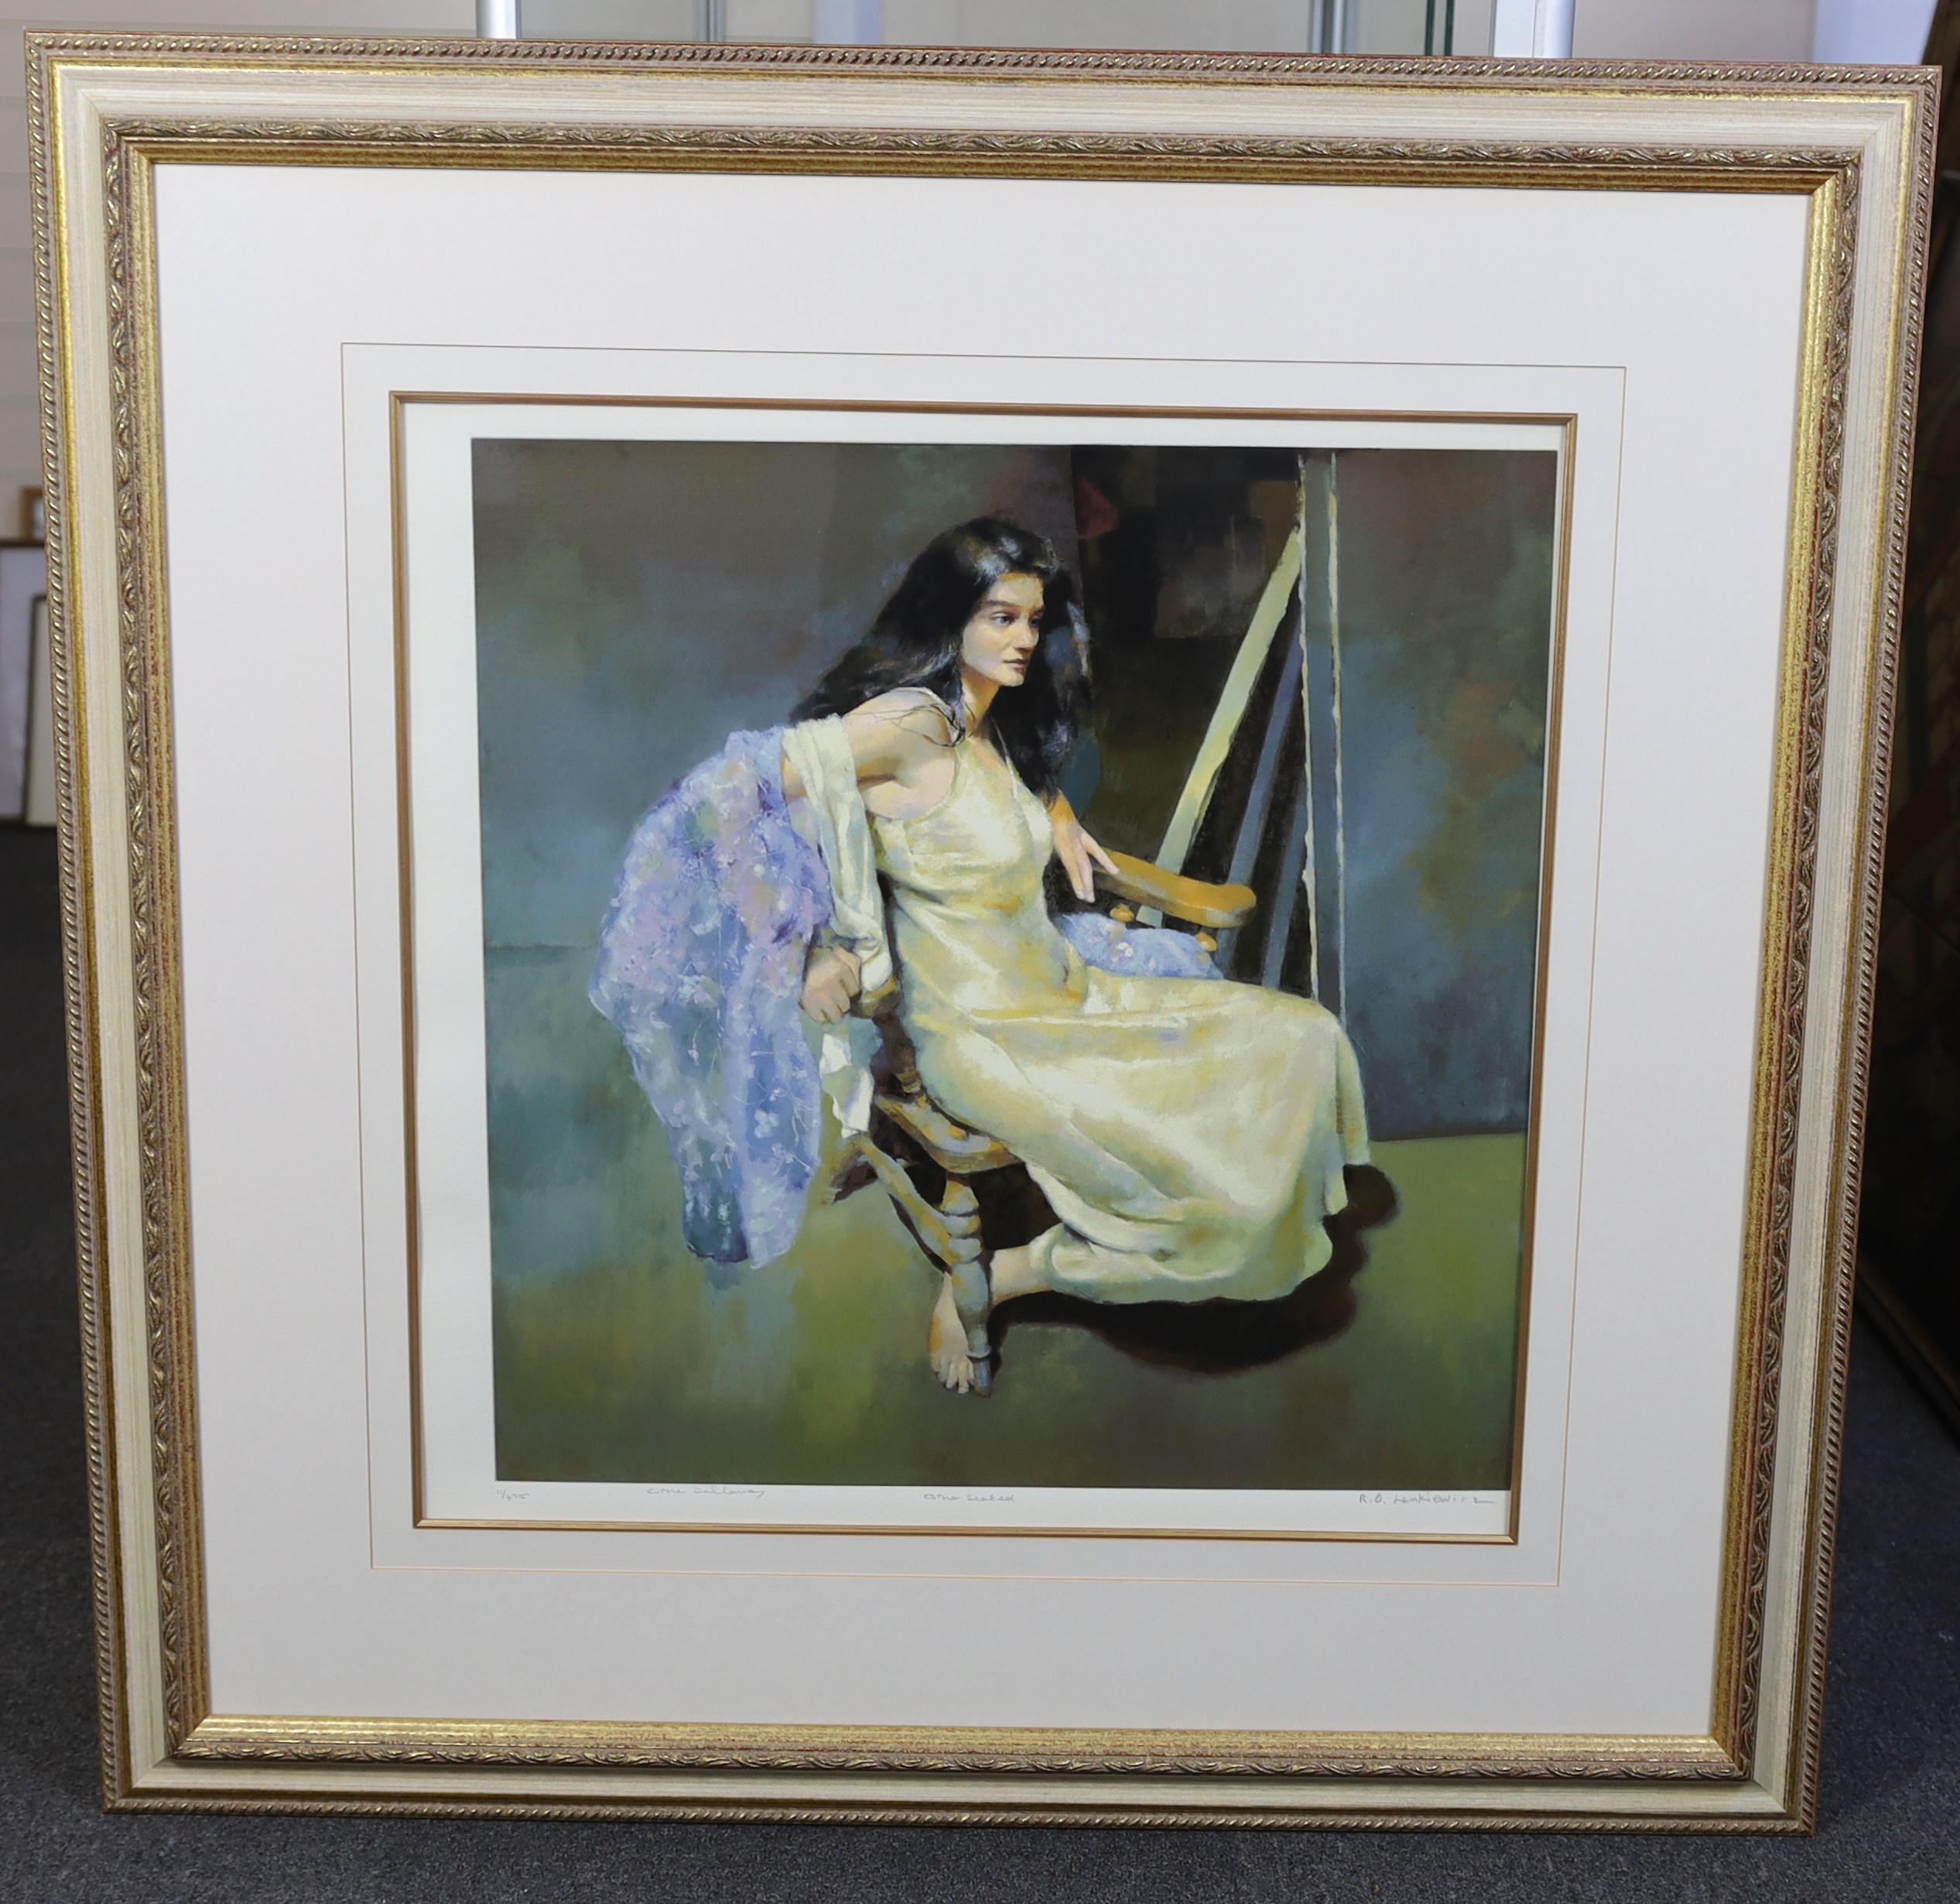 Robert Lenkiewicz (1941-2002), silkscreen, 'Ester seated by R.O. Lenkiewicz', signed in pencil and titled along with the name of the artist Ester Dallaunay, 11/475, 60 x 60cm. Condition - good, print is loose within the